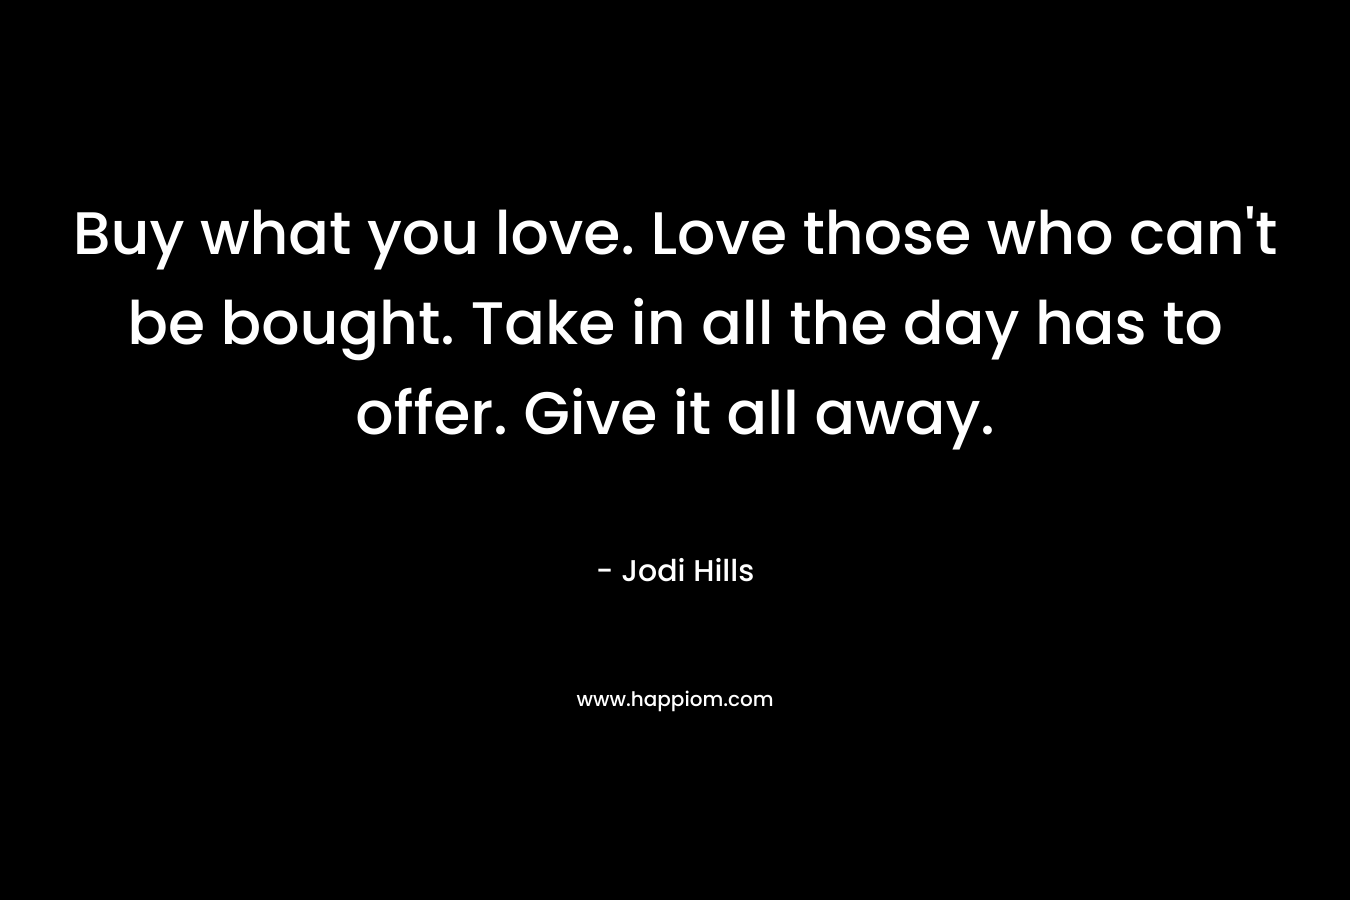 Buy what you love. Love those who can’t be bought. Take in all the day has to offer. Give it all away. – Jodi Hills